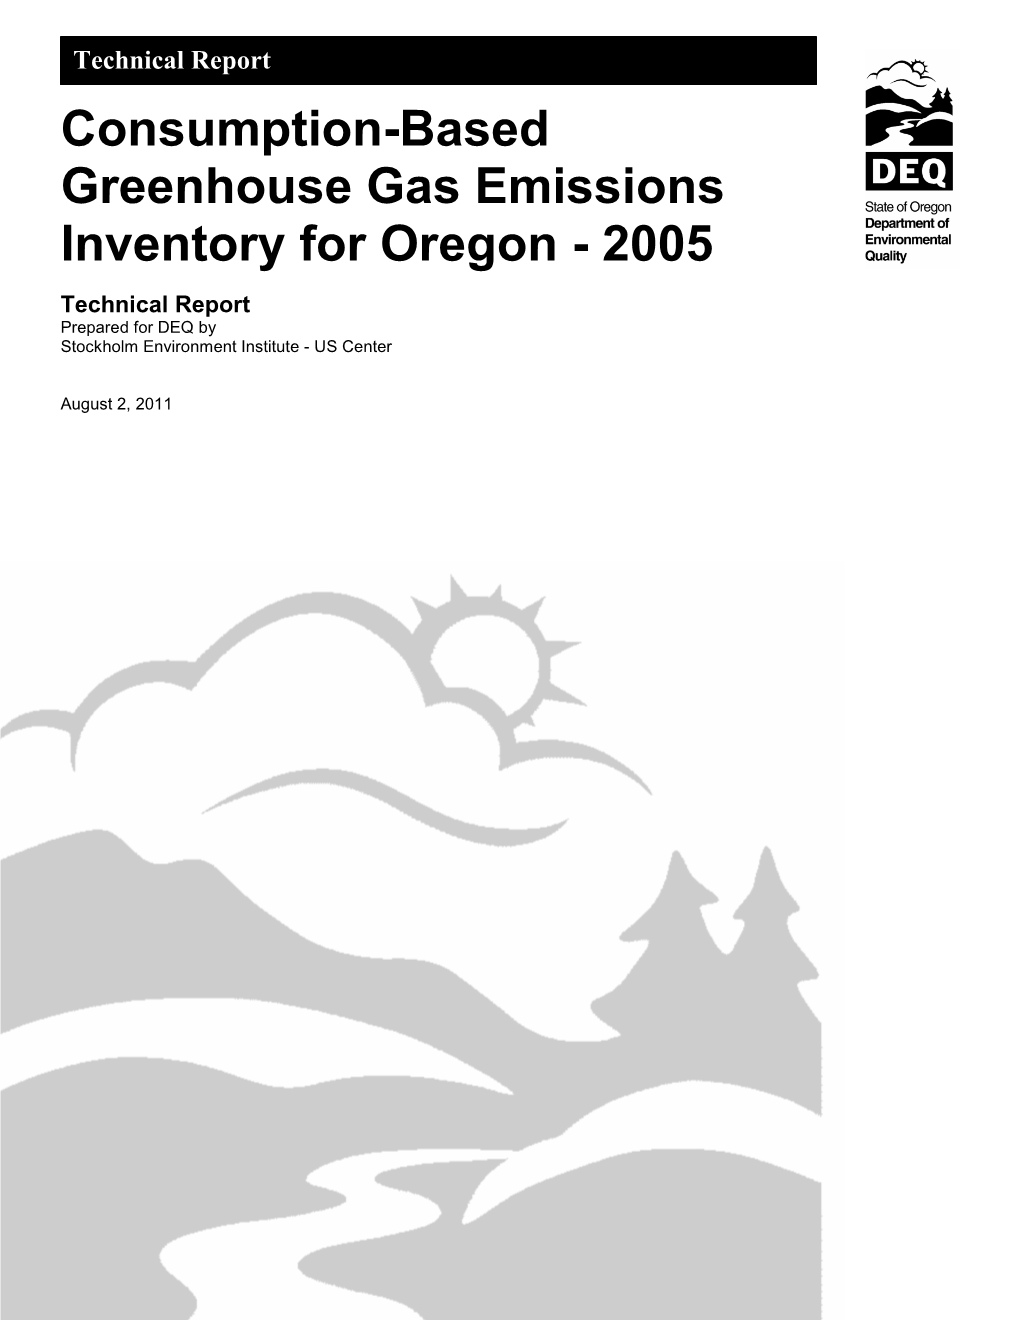 Consumption-Based Greenhouse Gas Emissions Inventory for Oregon - 2005